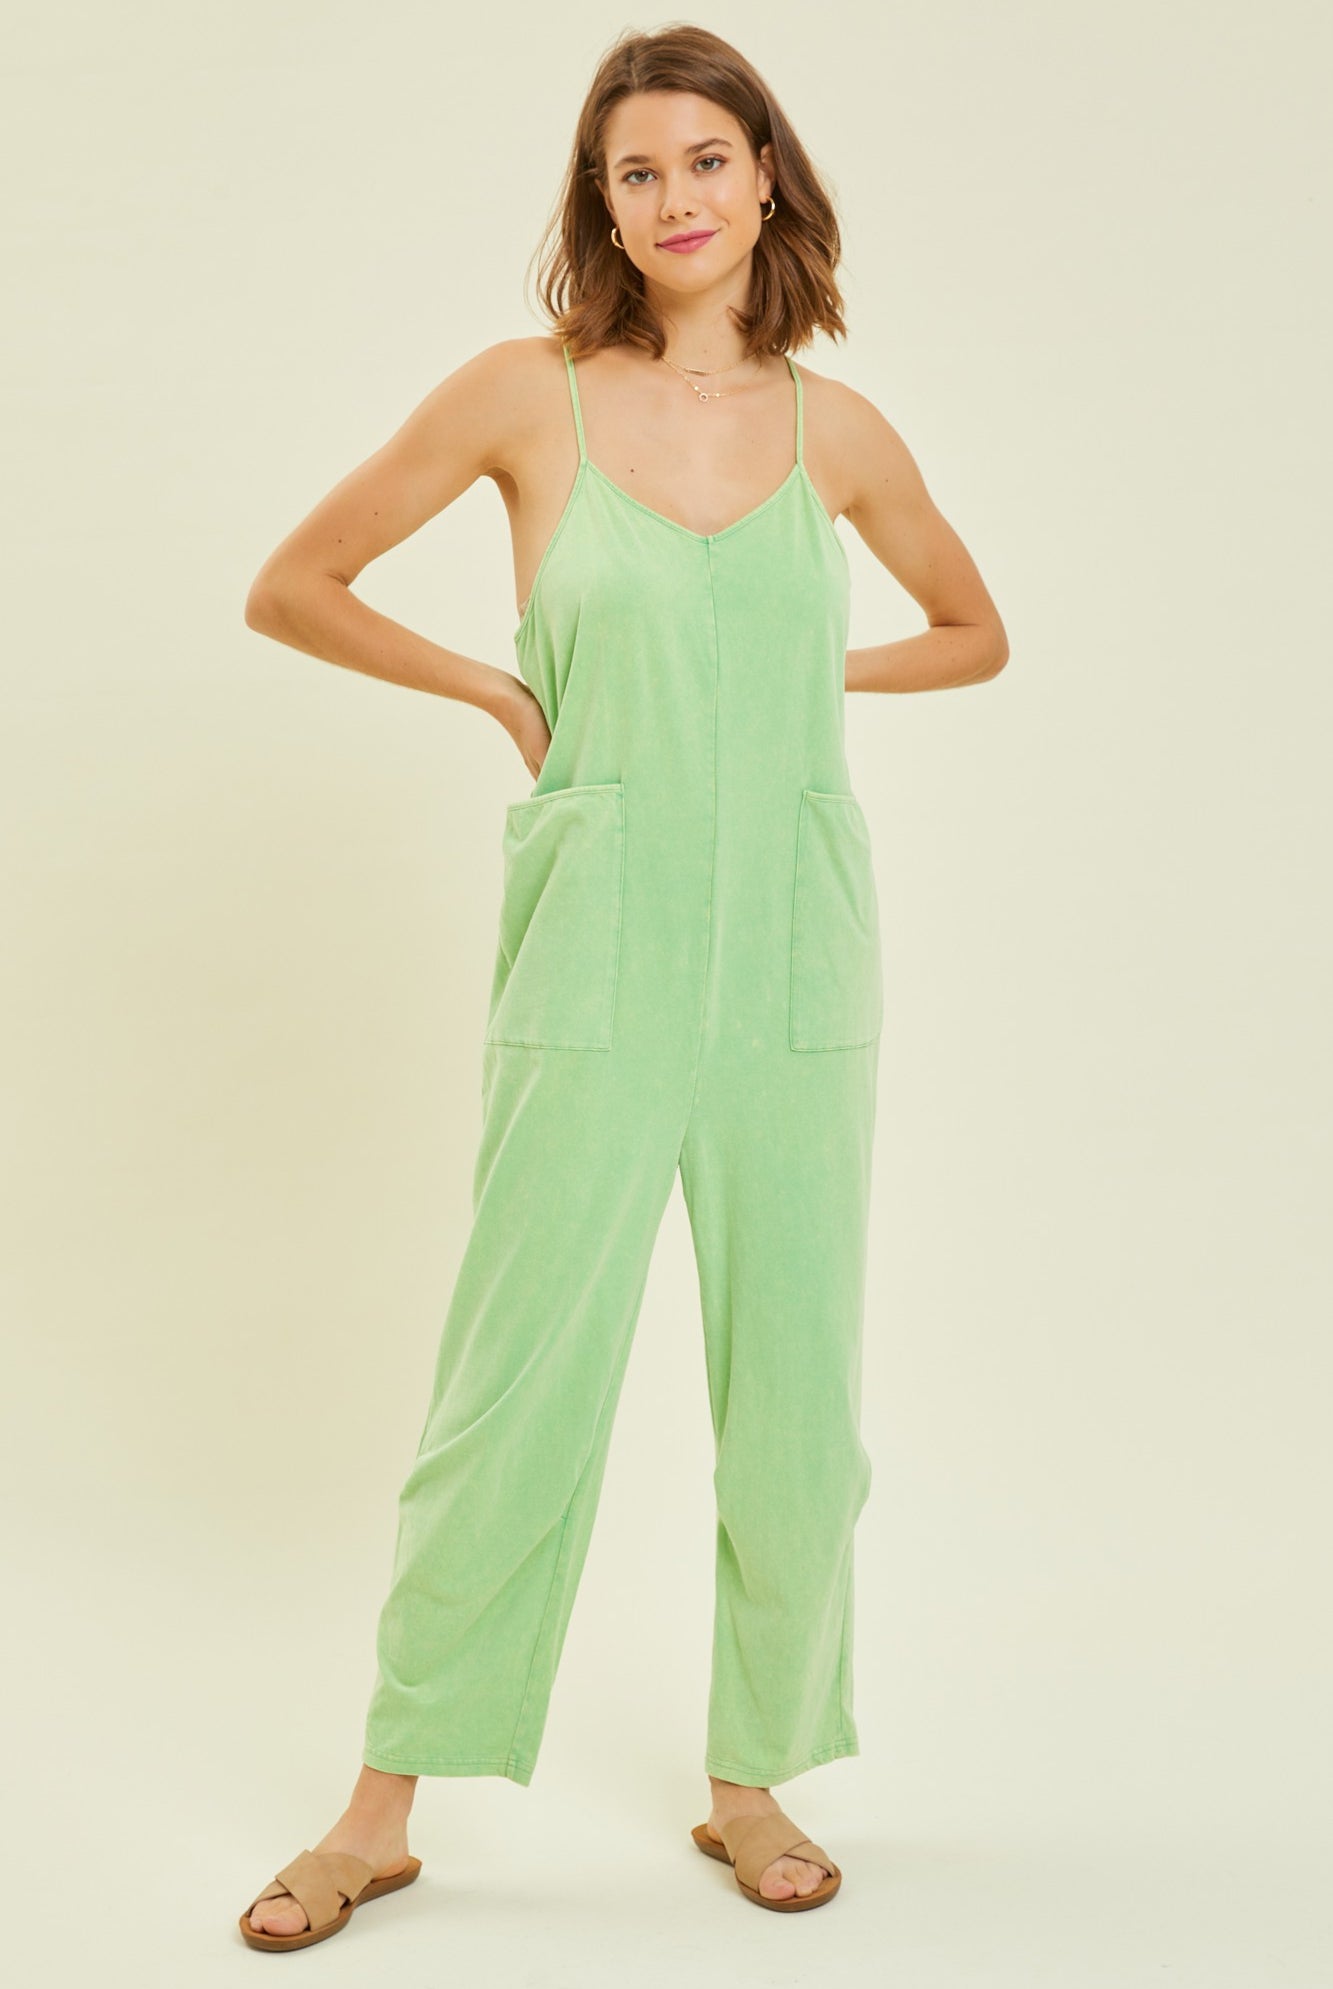 Liam Mineral Washed Oversized Casual Jumpsuit - Be You Boutique